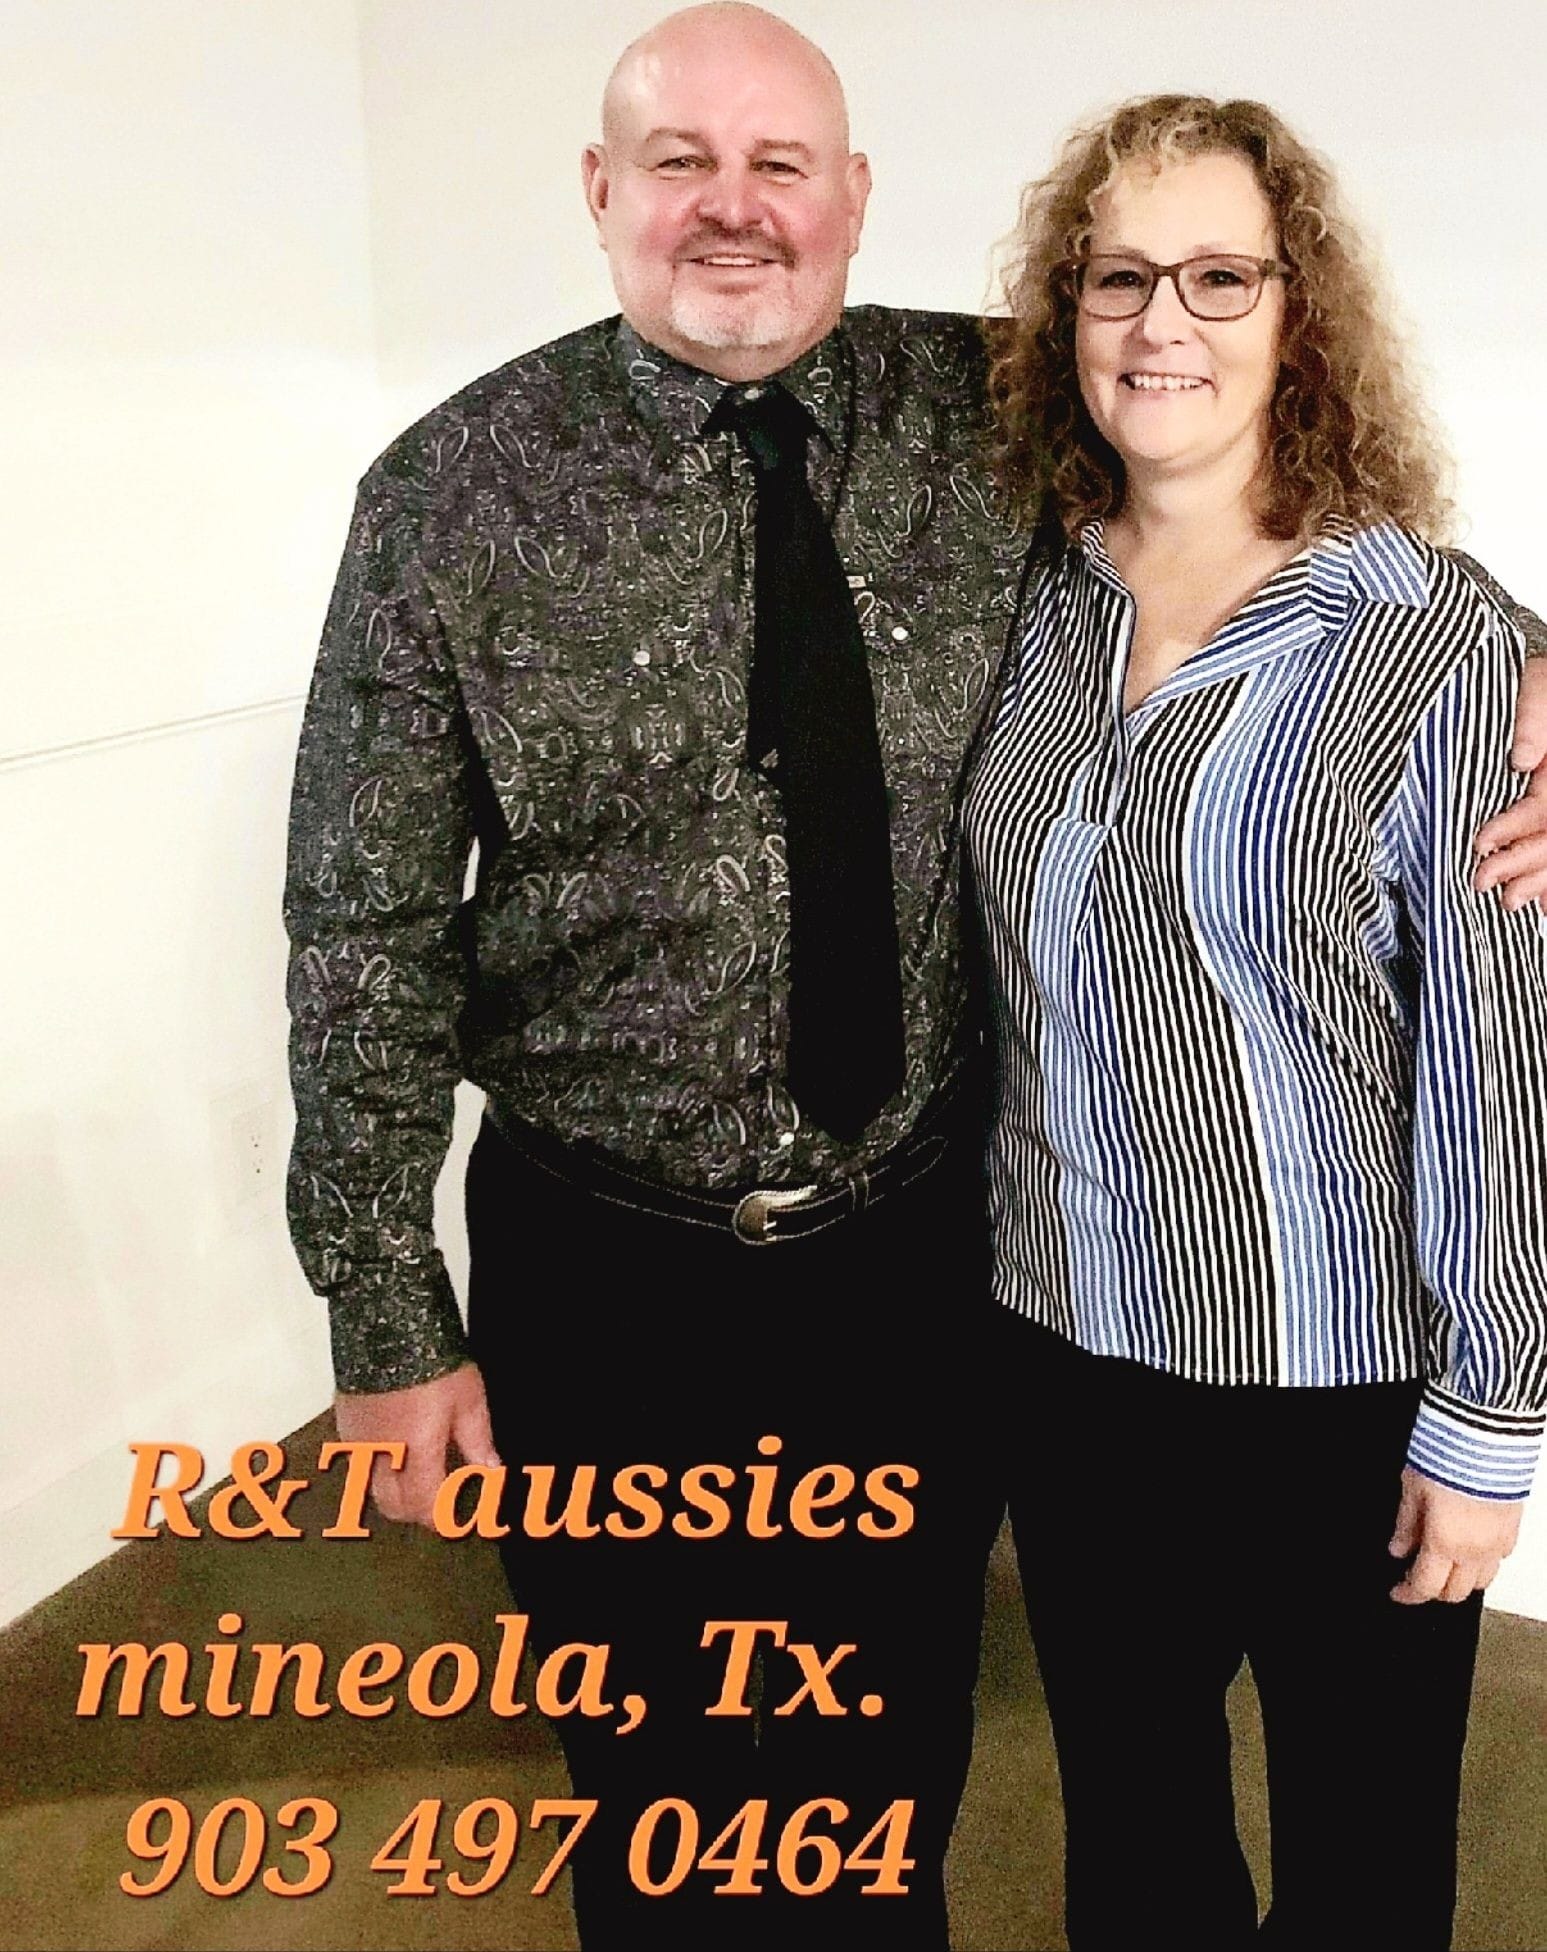 R&T aussies   located in mineola, tx 